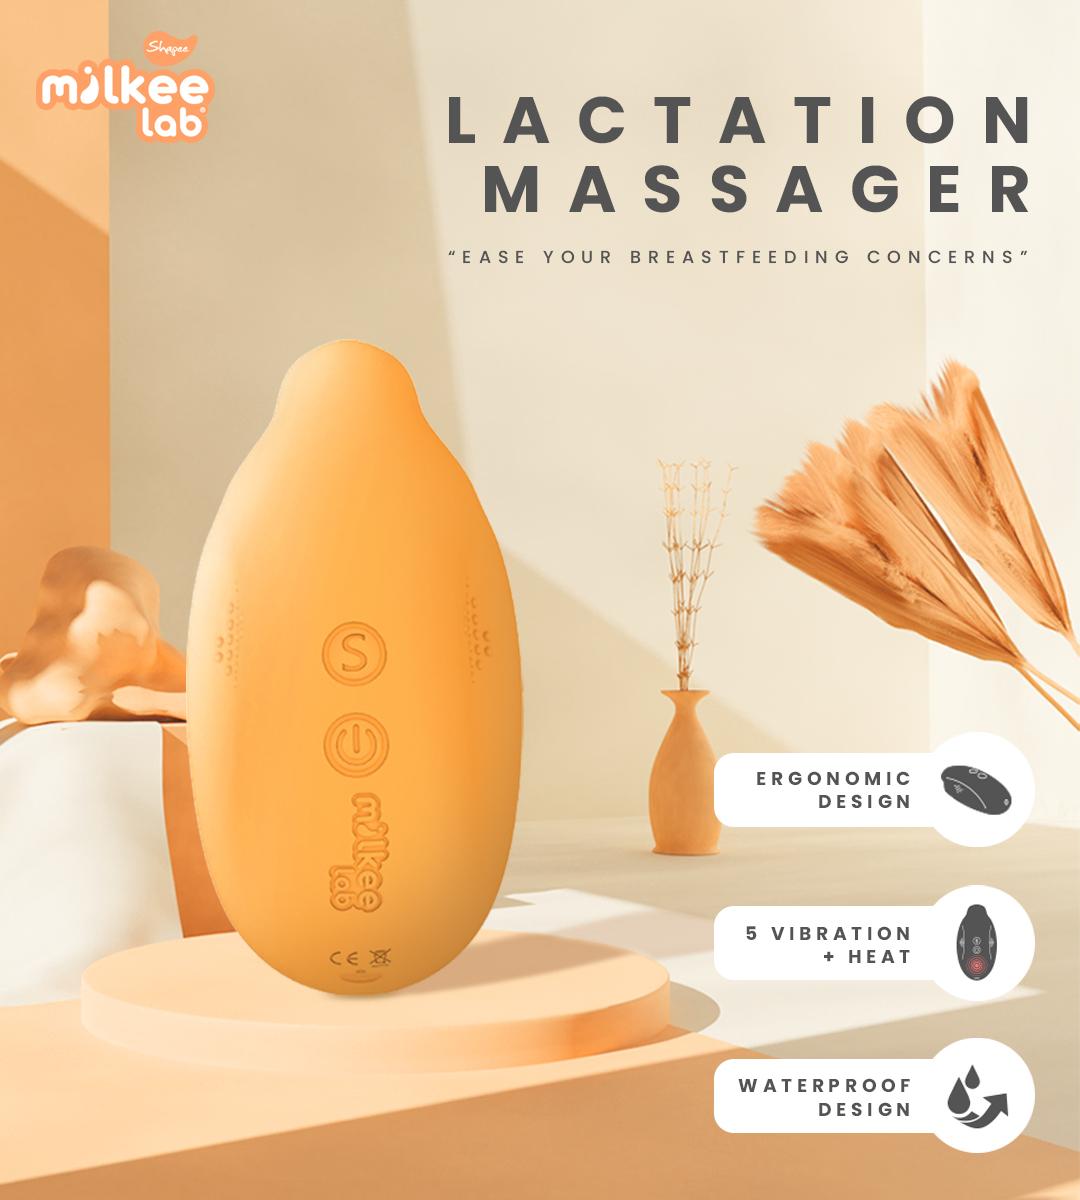 Milkee Lab Lactation Massager  Subplace: Subscriptions Make Life Easier